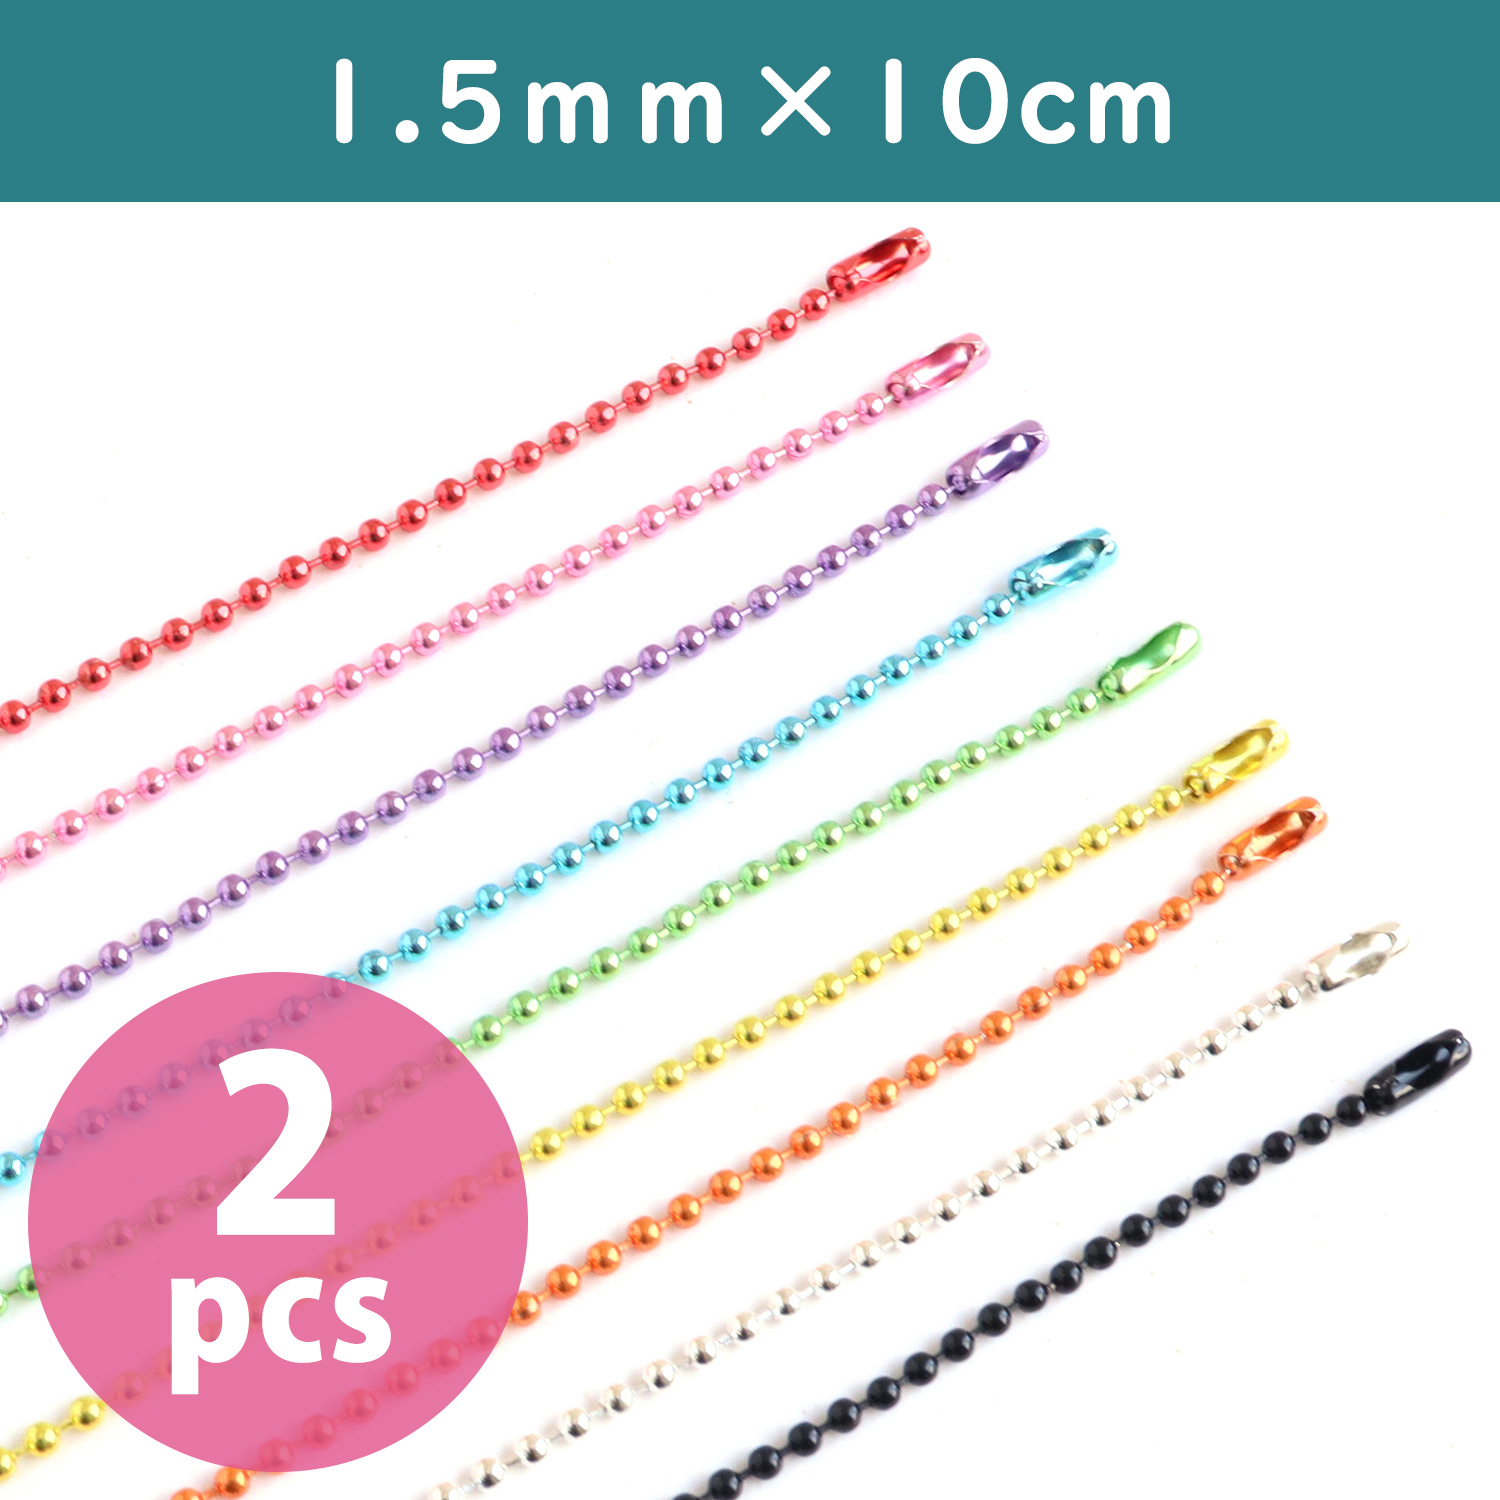 Colored Ball Chain Black 1.5mm x 10cm (pack)